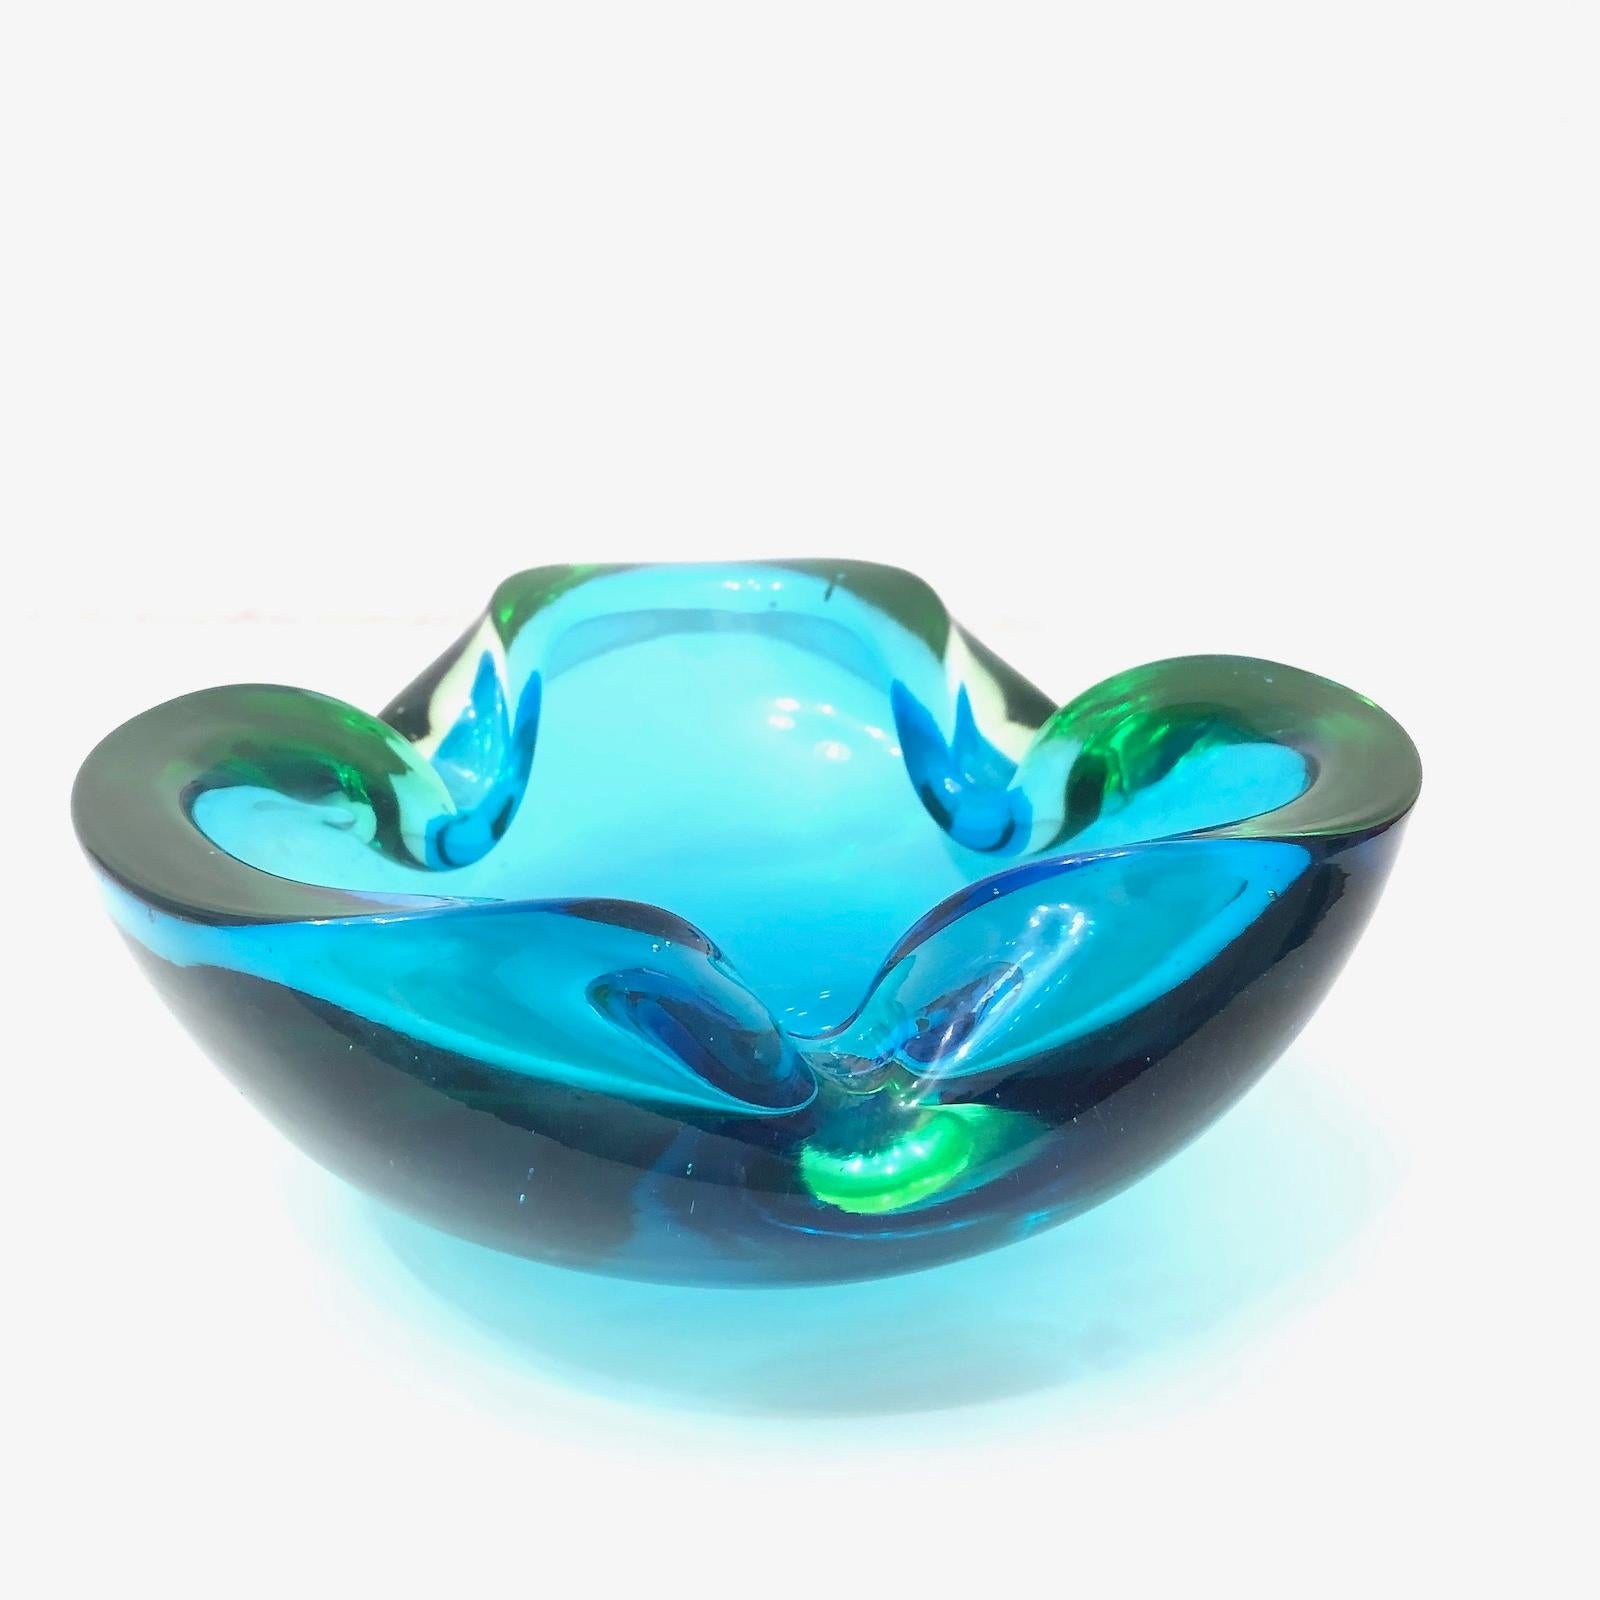 Gorgeous hand blown Murano art glass piece with Sommerso and bullicante techniques. A beautiful organic shaped bowl, catchall or ashtray in blue and green. Italy, 1970s.